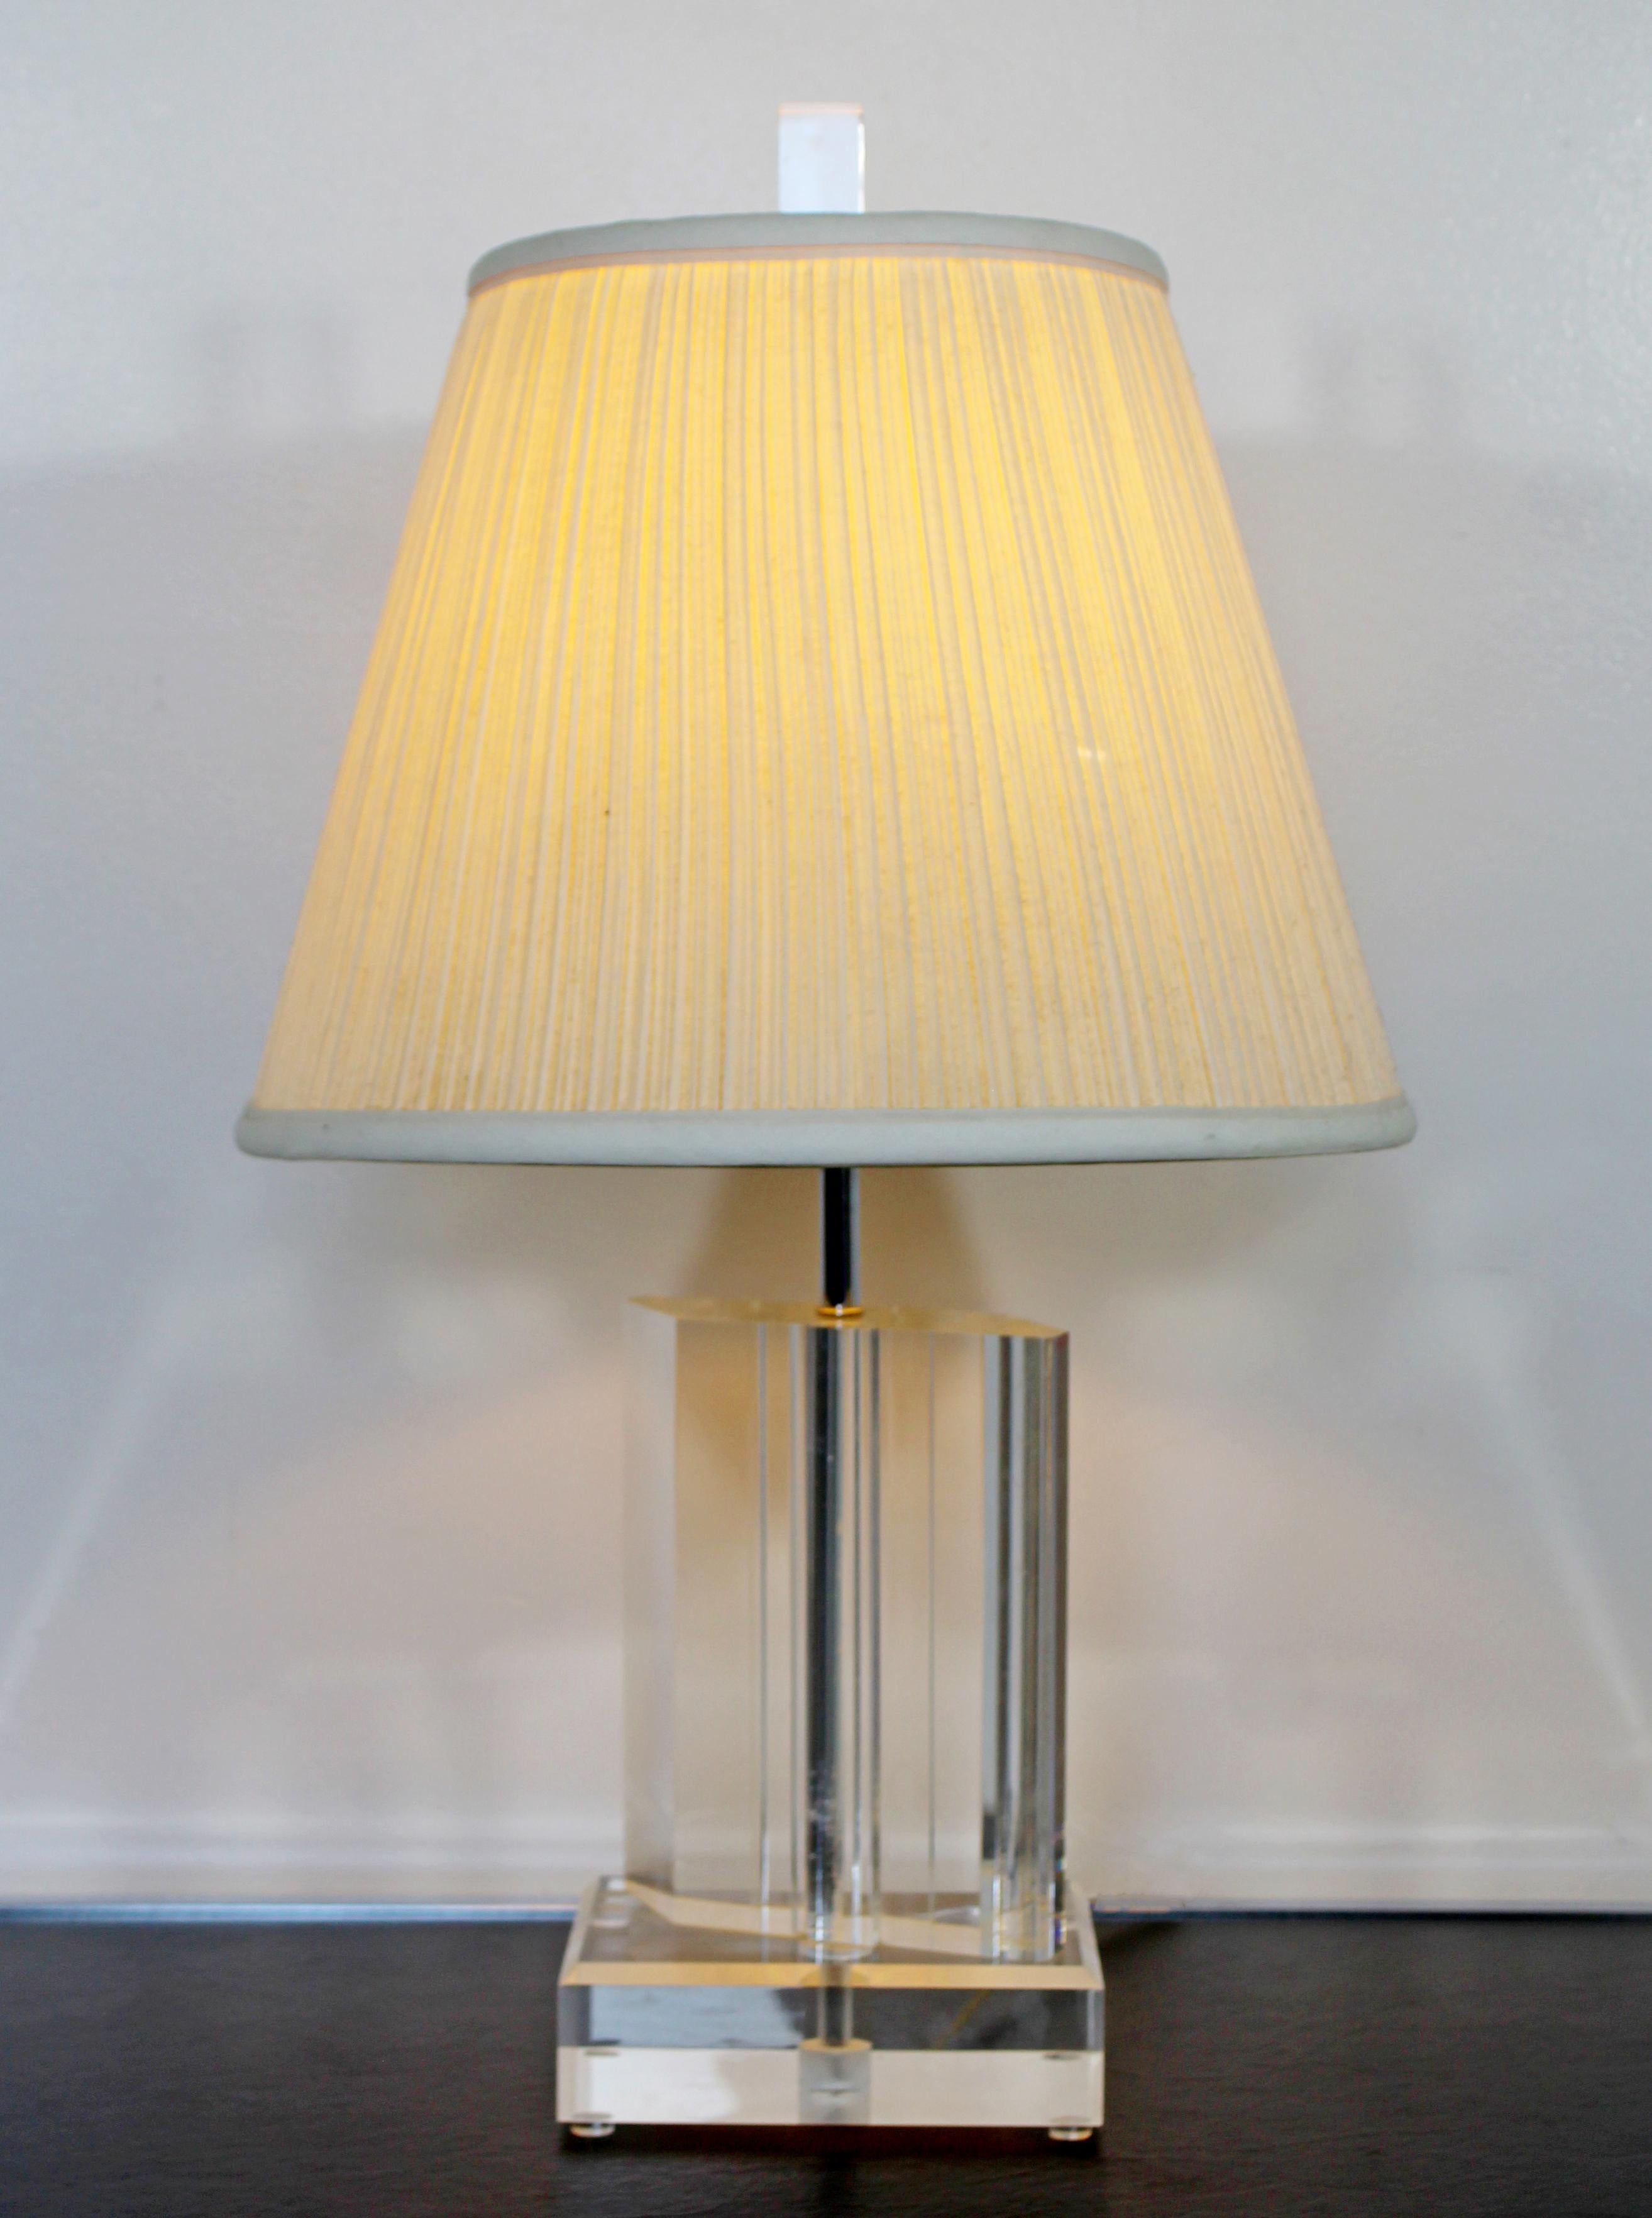 For your consideration is a wonderful, angled Lucite table lamp, with original shade and finial, in the style of Karl Springer, circa 1970s. In very good vintage condition. The dimensions of the lamp are 6.5